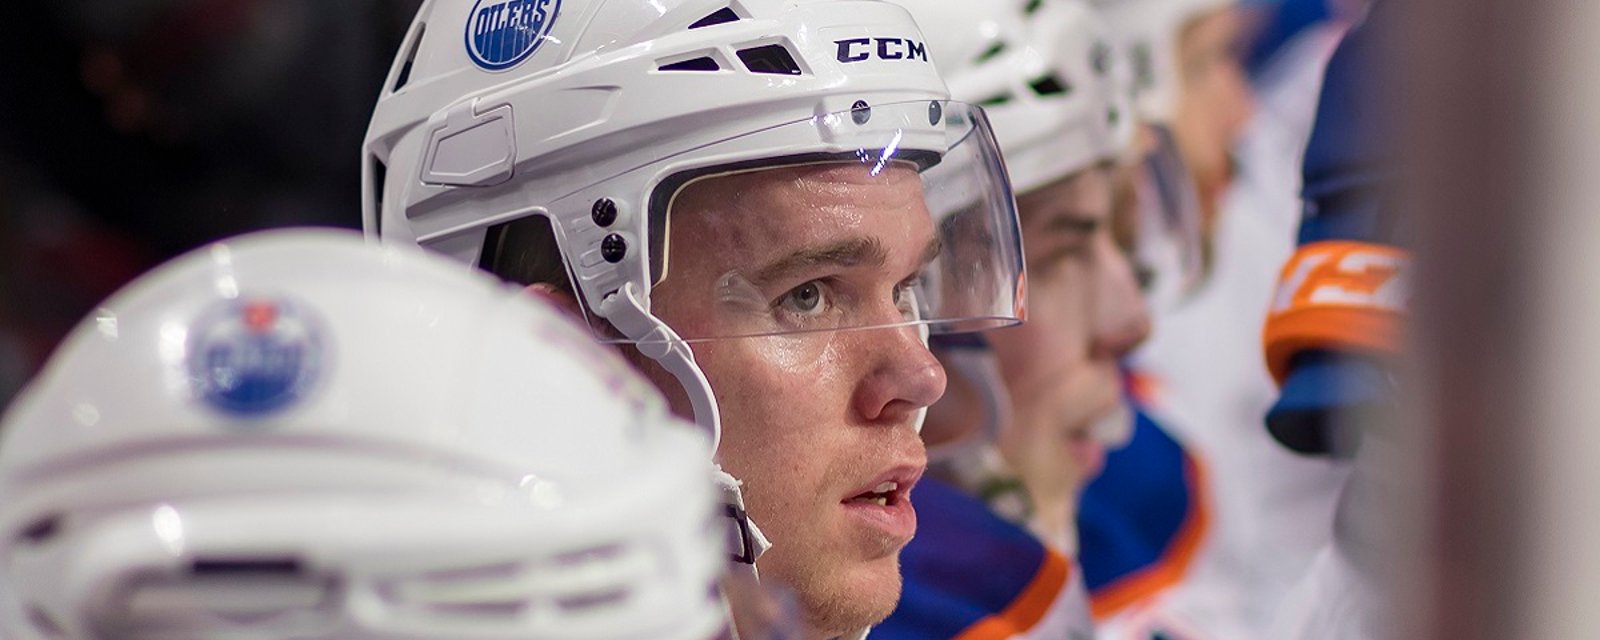 Don't be fooled, the Oilers appear to still be terrible without McDavid on the ice.